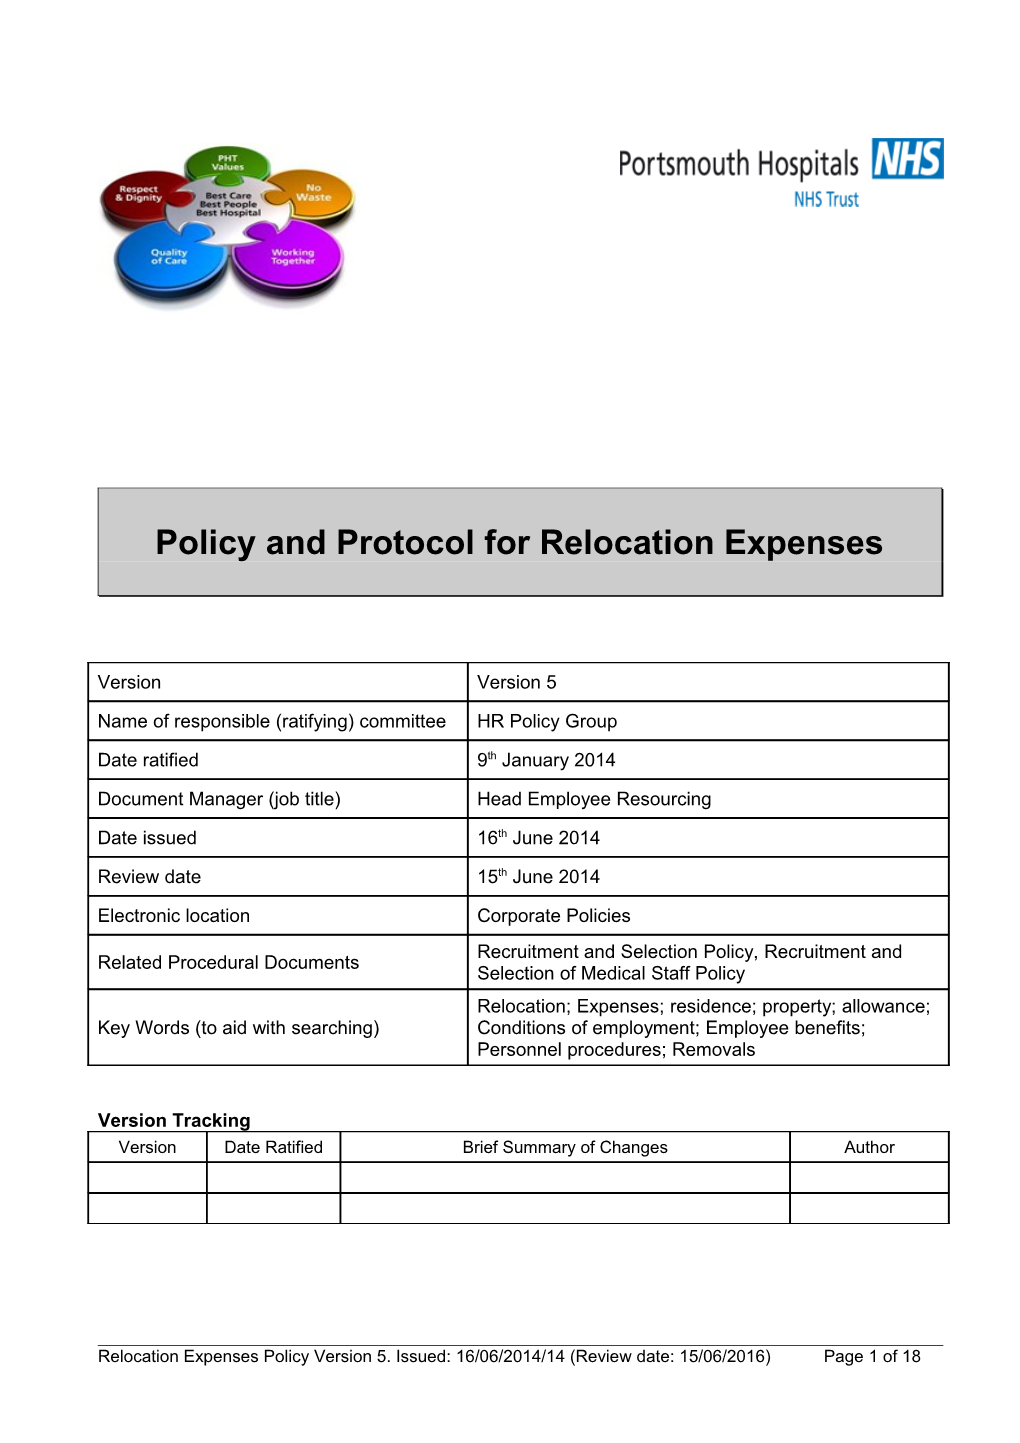 Policy and Protocol for Relocation Expenses